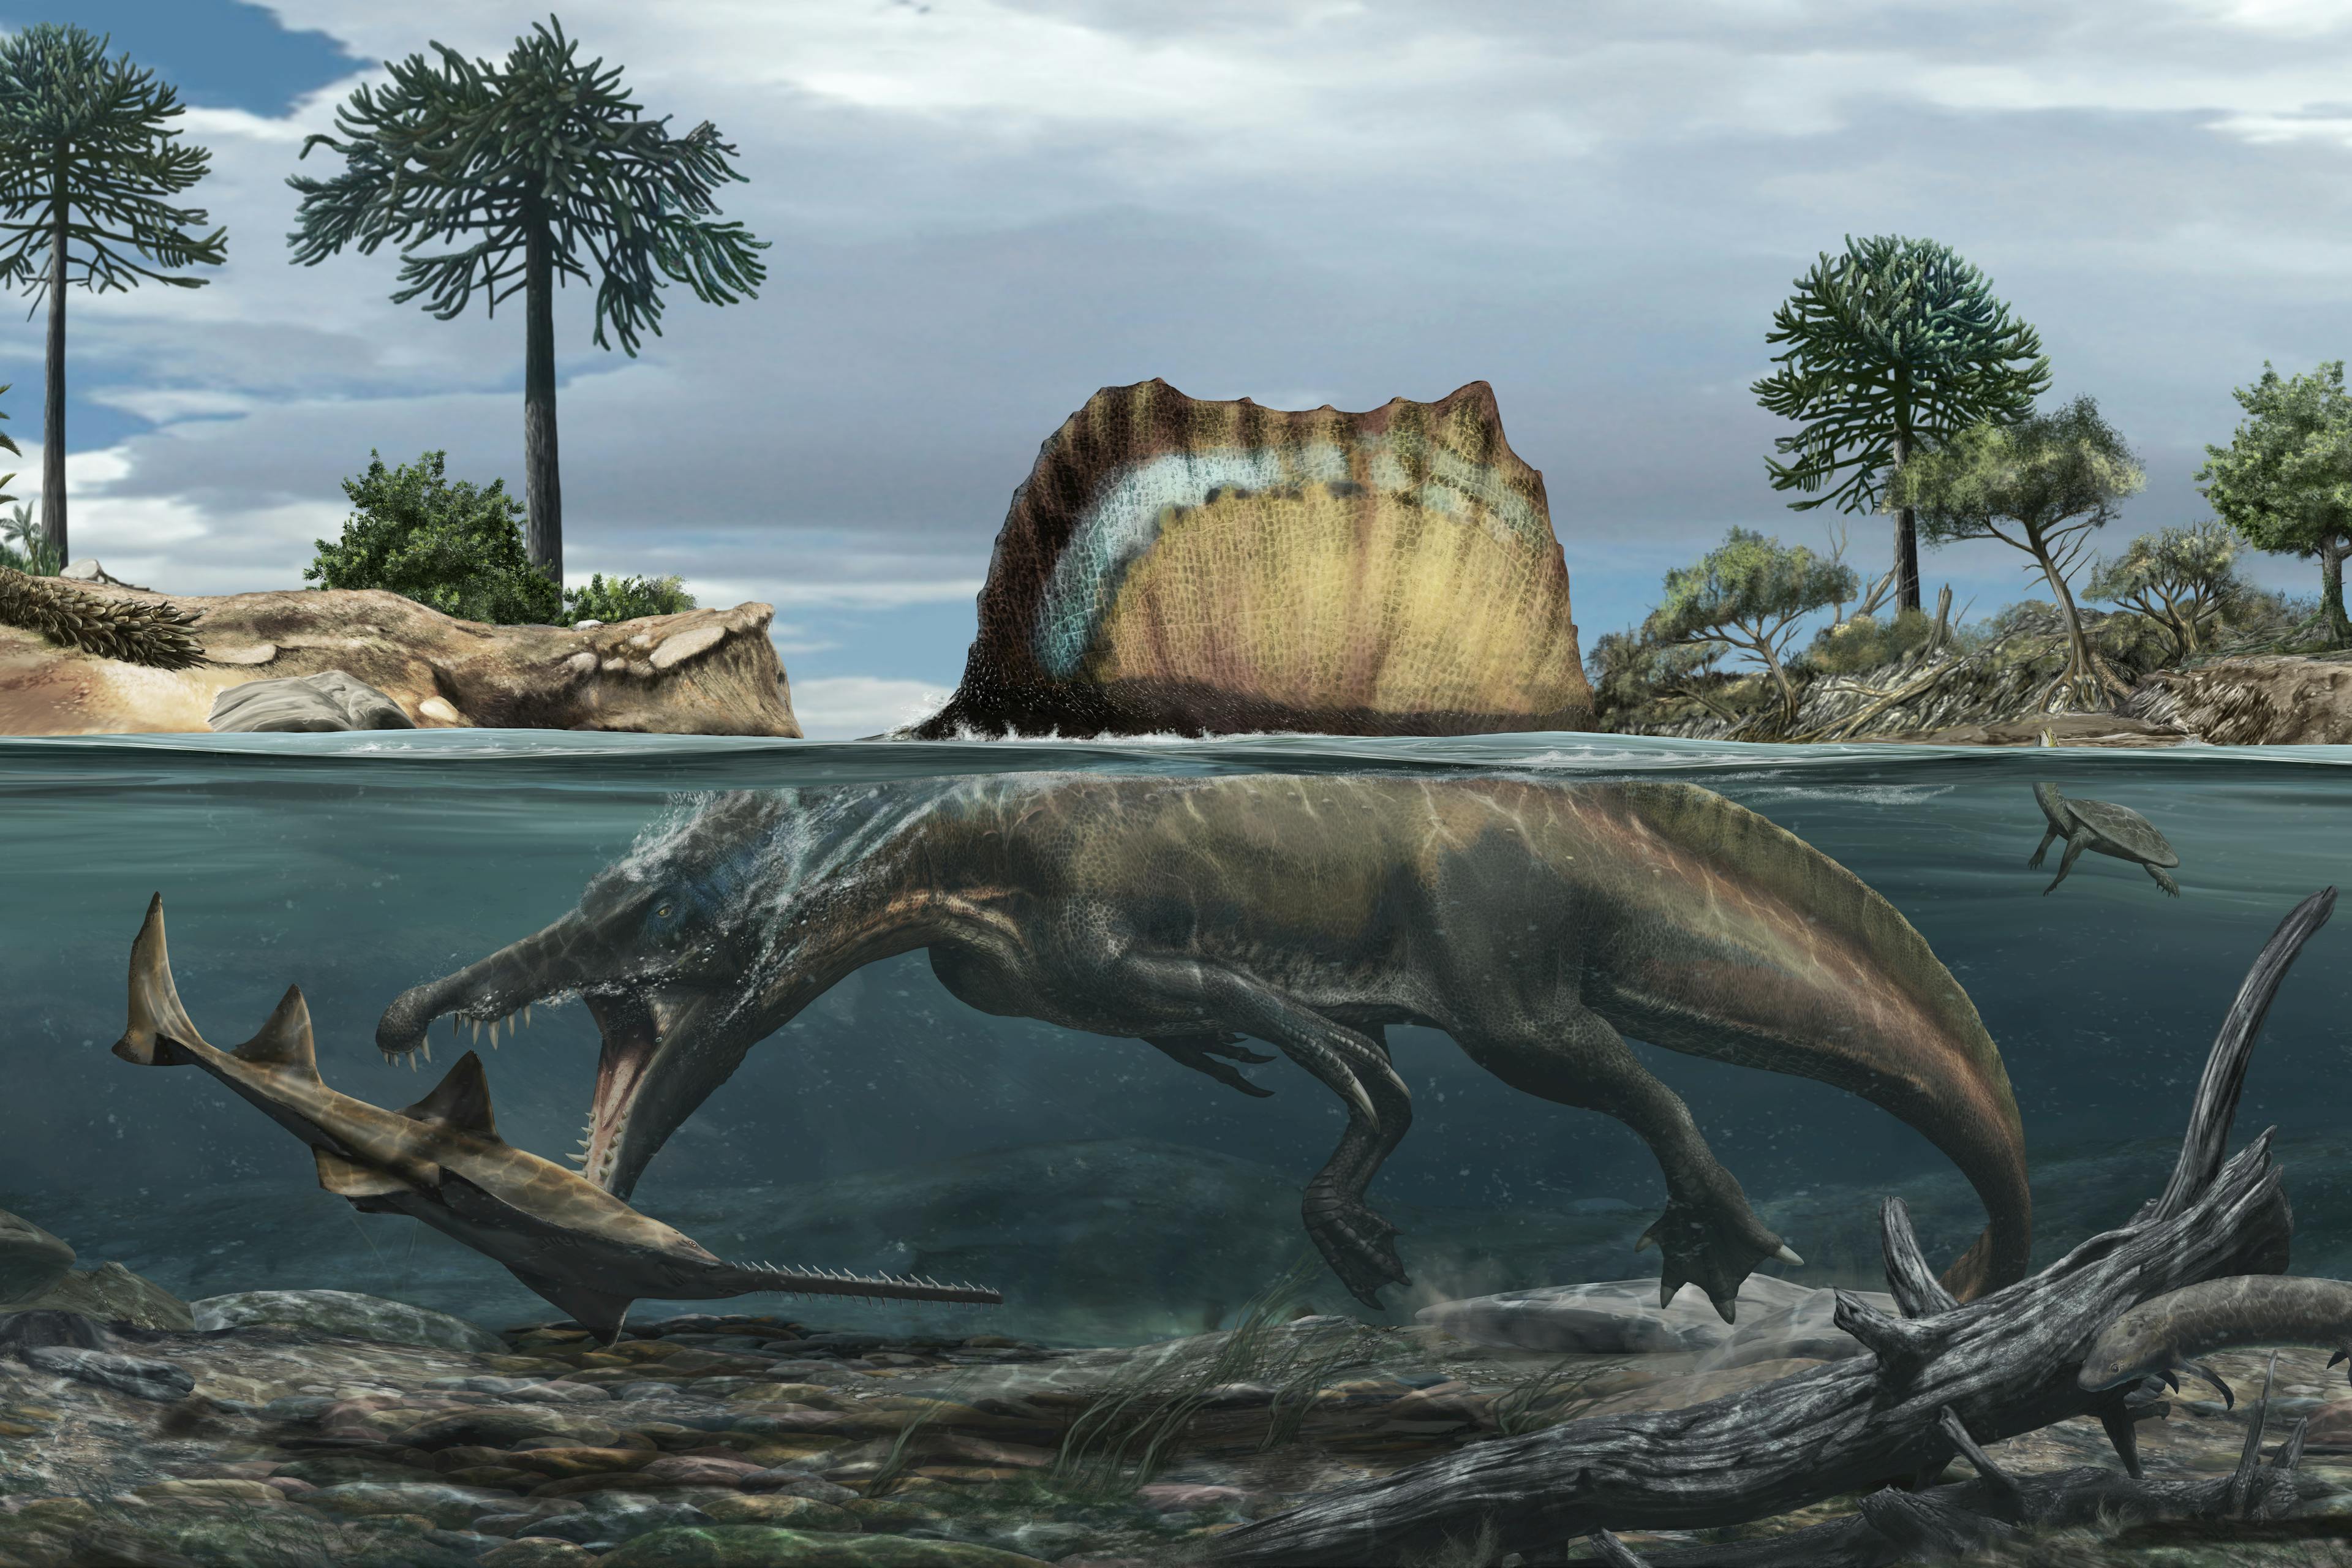 Artist's rendering of a spinosaurus hunting a smaller fish-like creature underwater